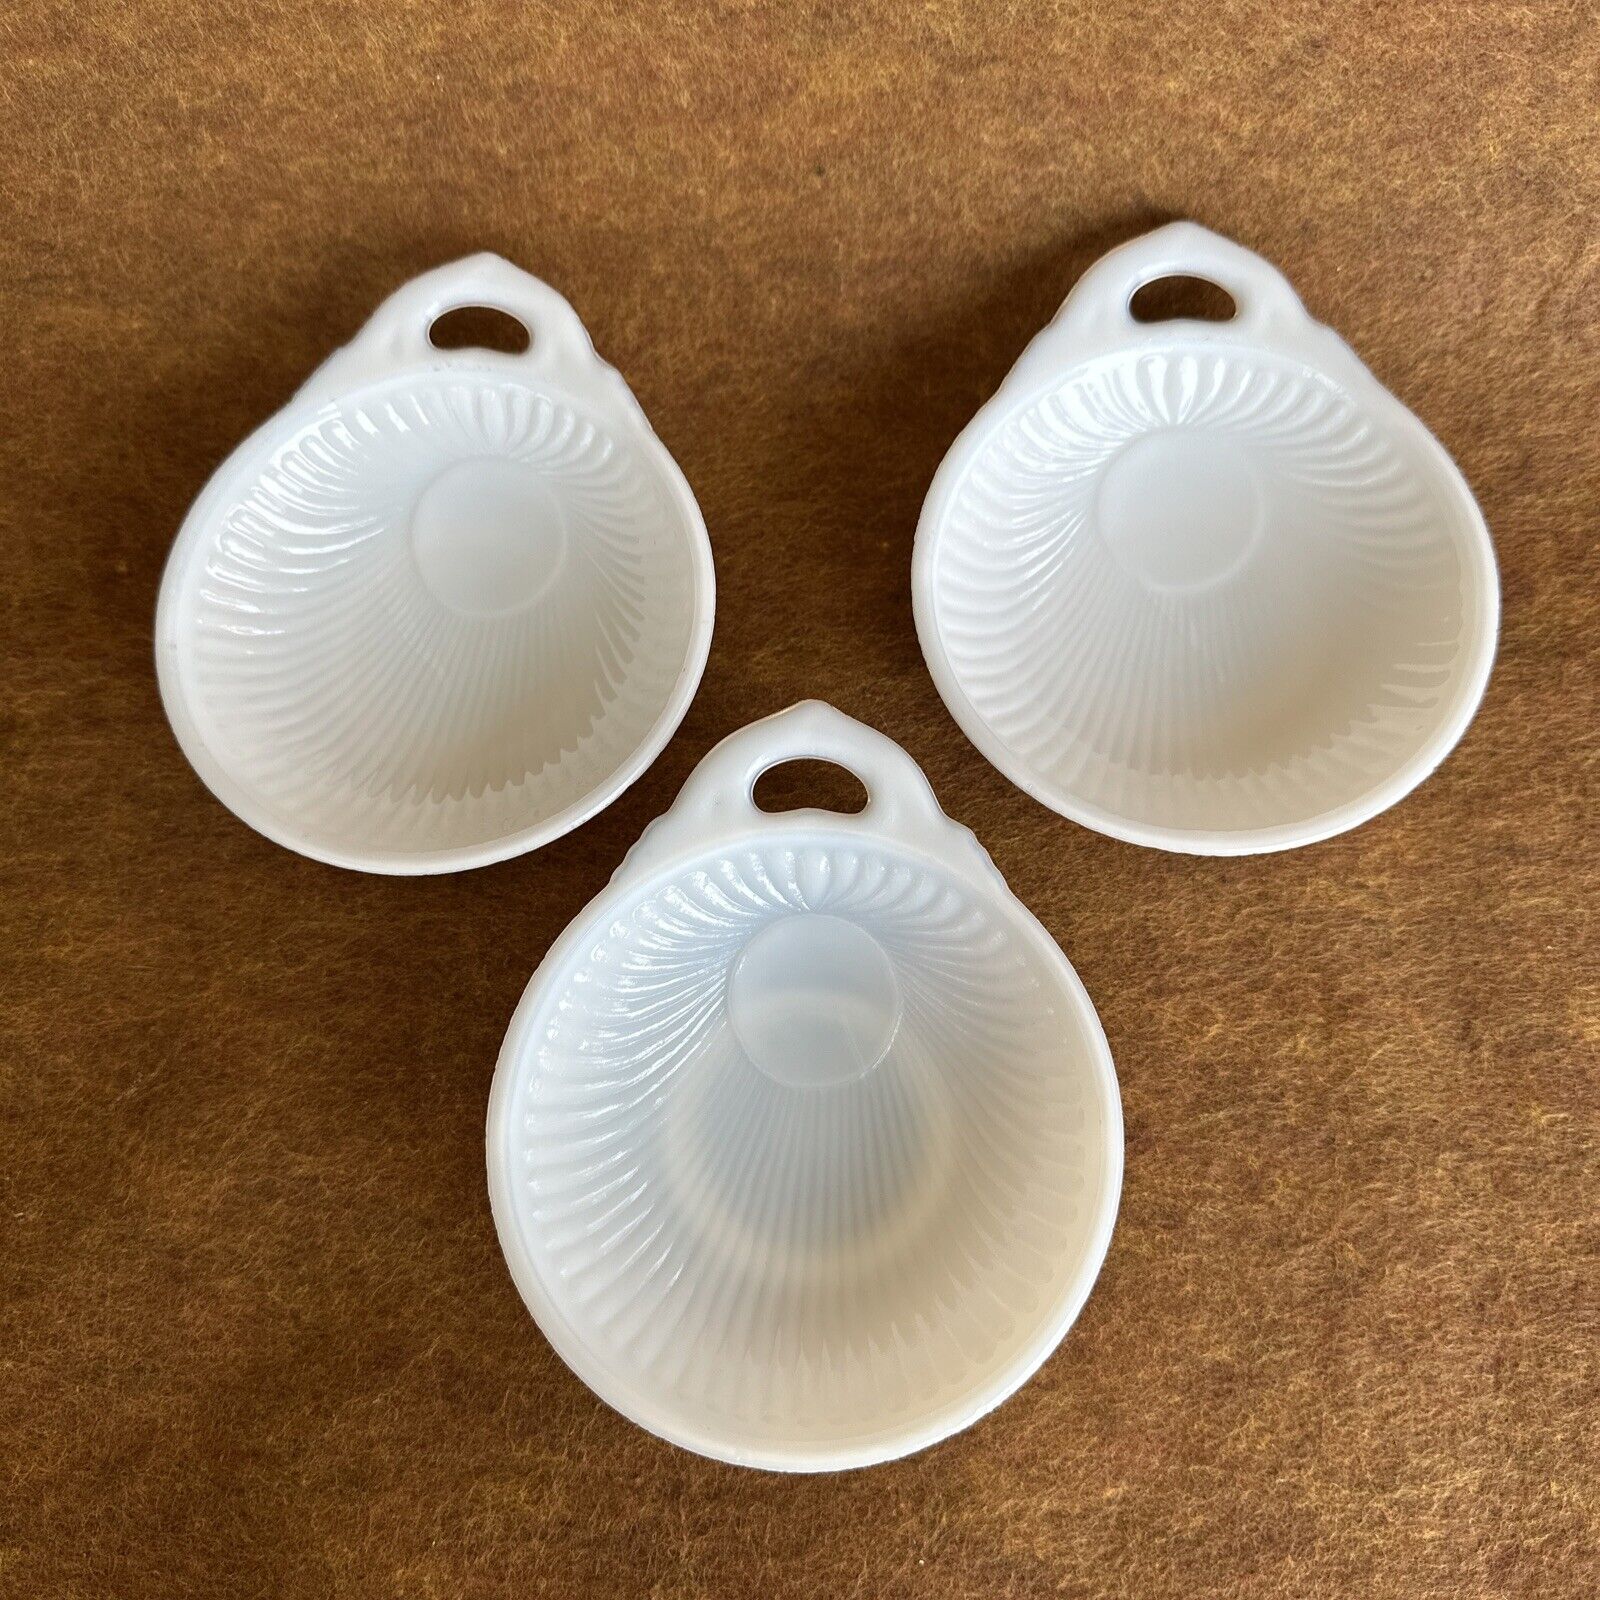 Three Antique ATTERBURY & Co. Shell Dishes White Milk Glass PATD OCT 29TH 1872